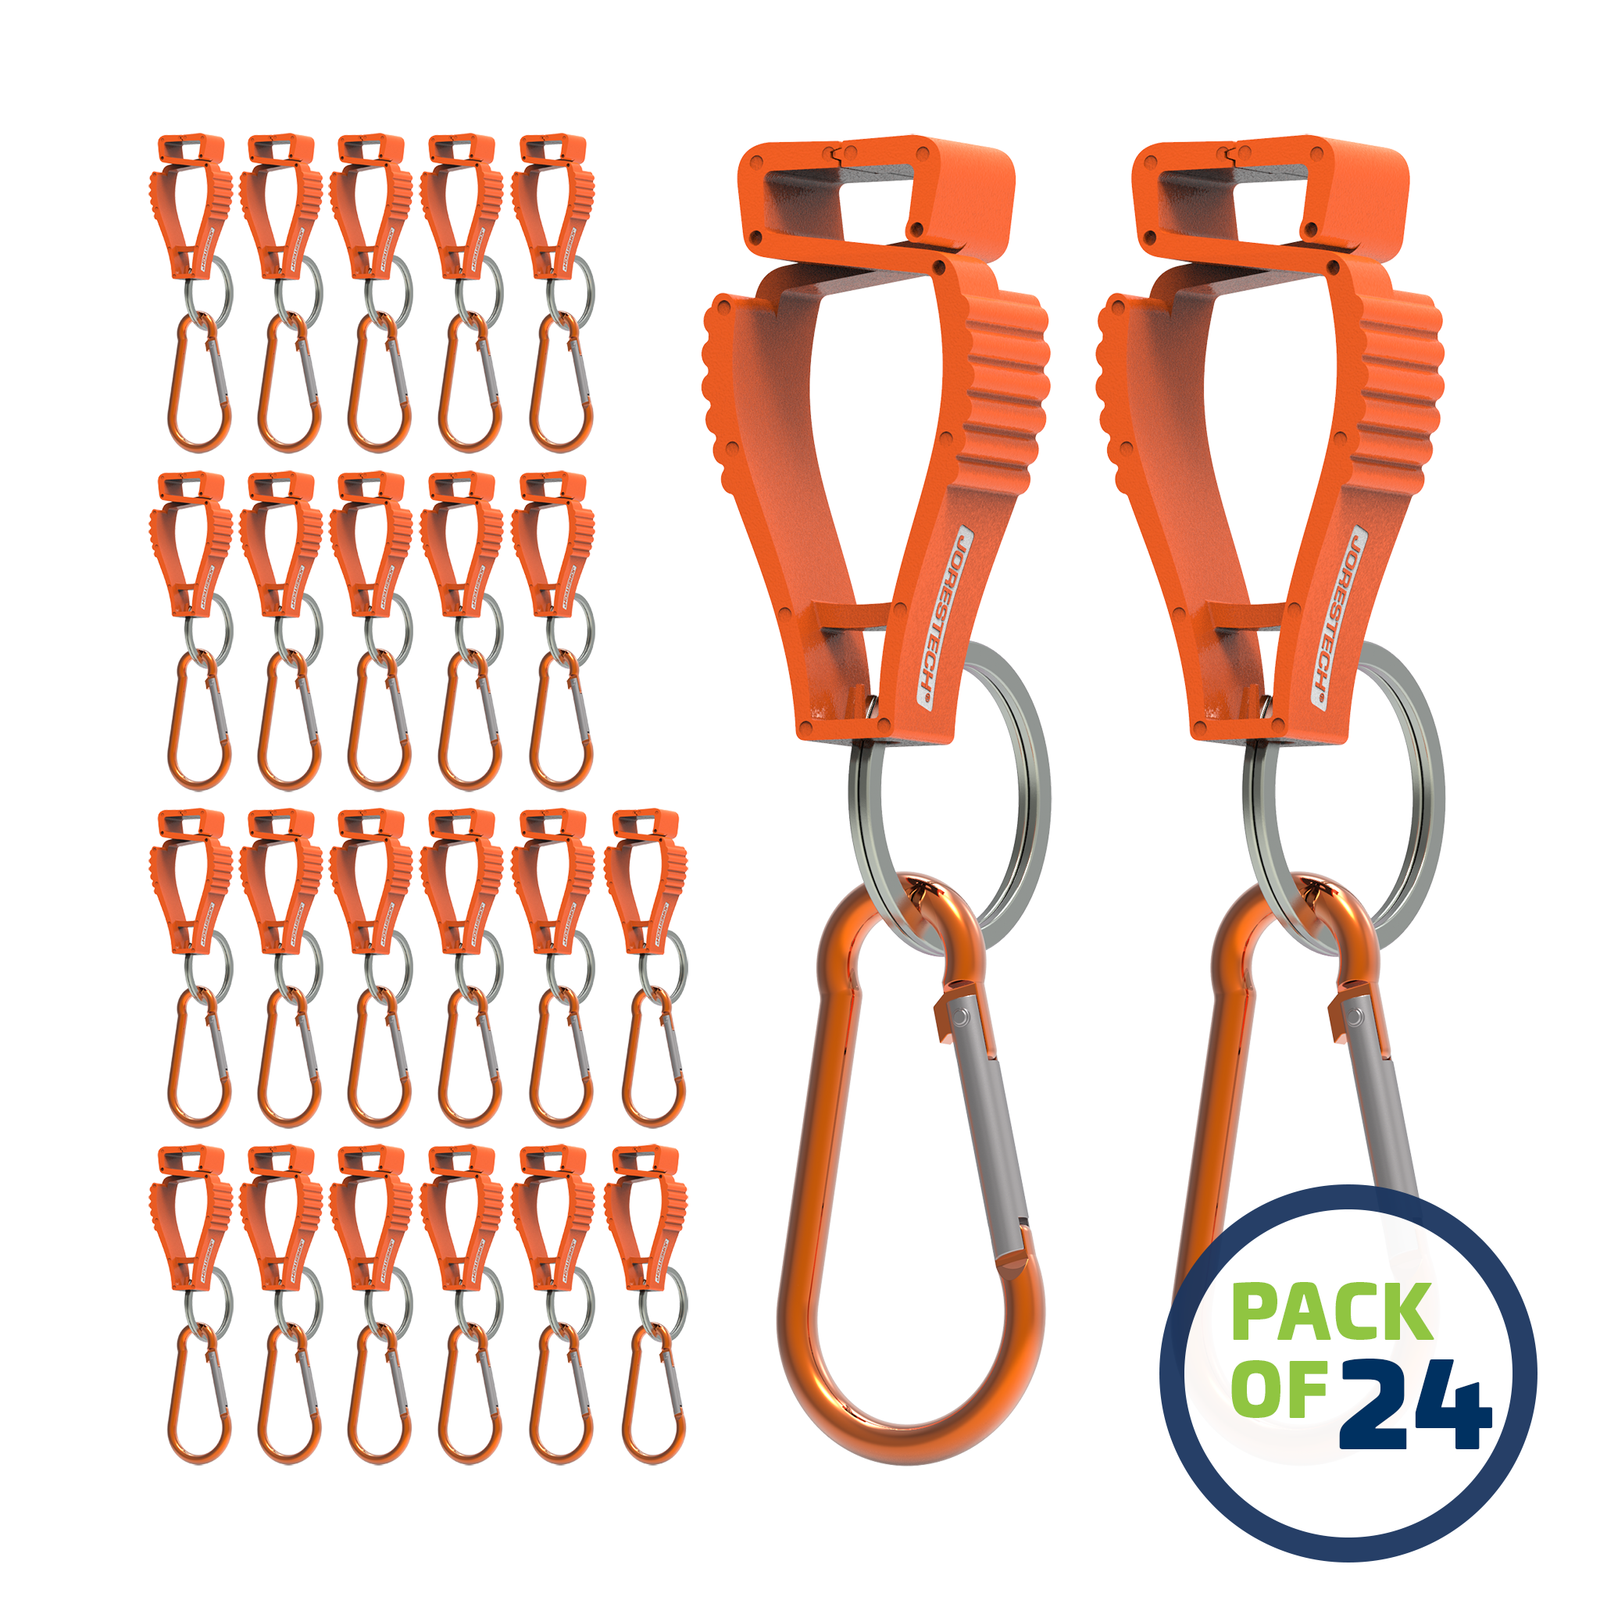 Pack of 24 Orange JORESTECH glove clip safety holders with carabiner 